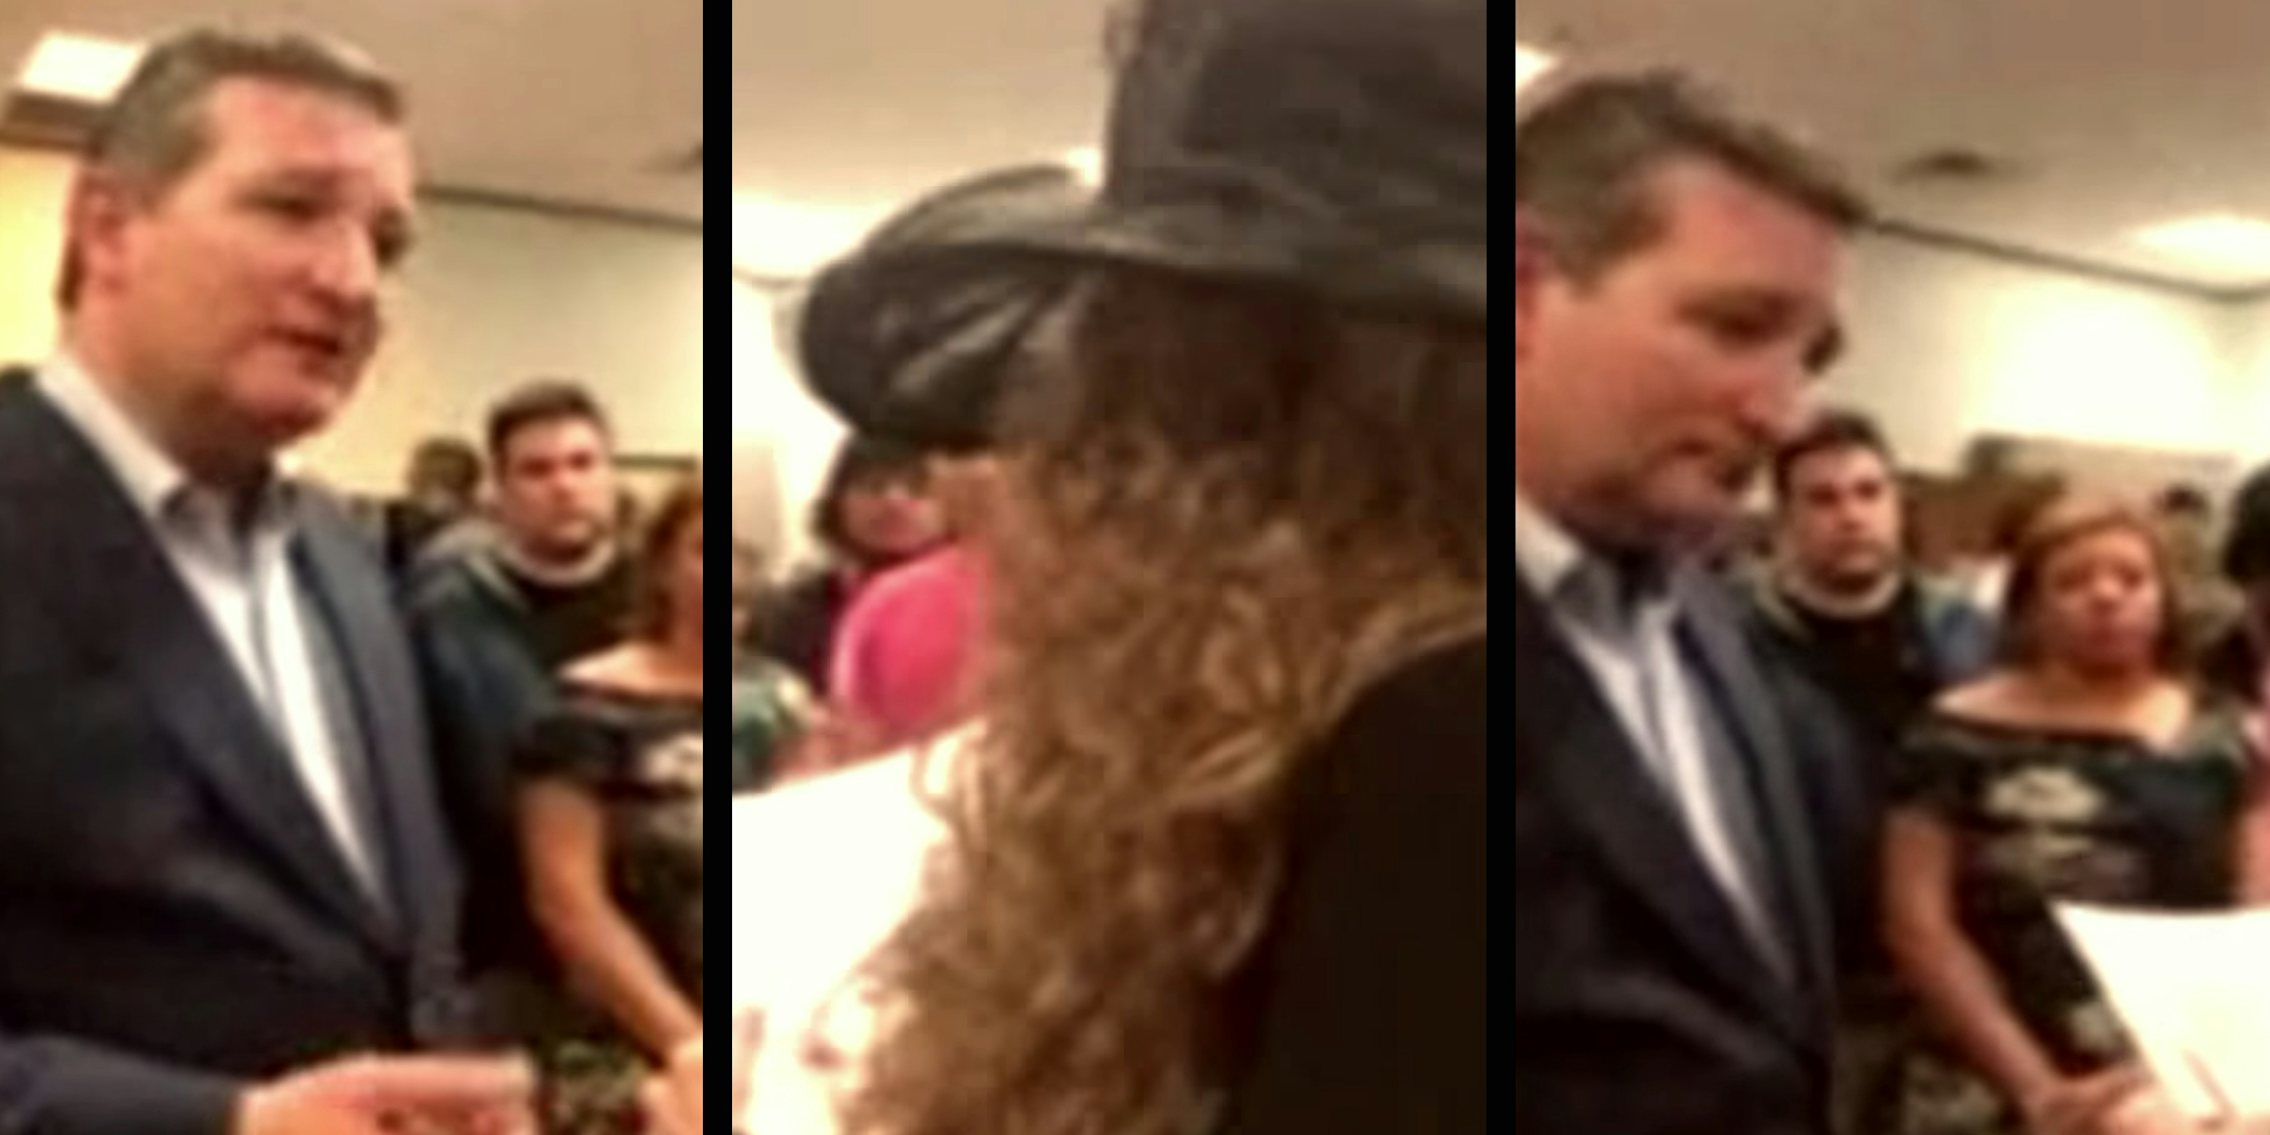 A woman asked Sen. Ted Cruz (R-Tx.) to take a DNA test to prove that he is human on Tuesday night. The exchange was posted on YouTube.